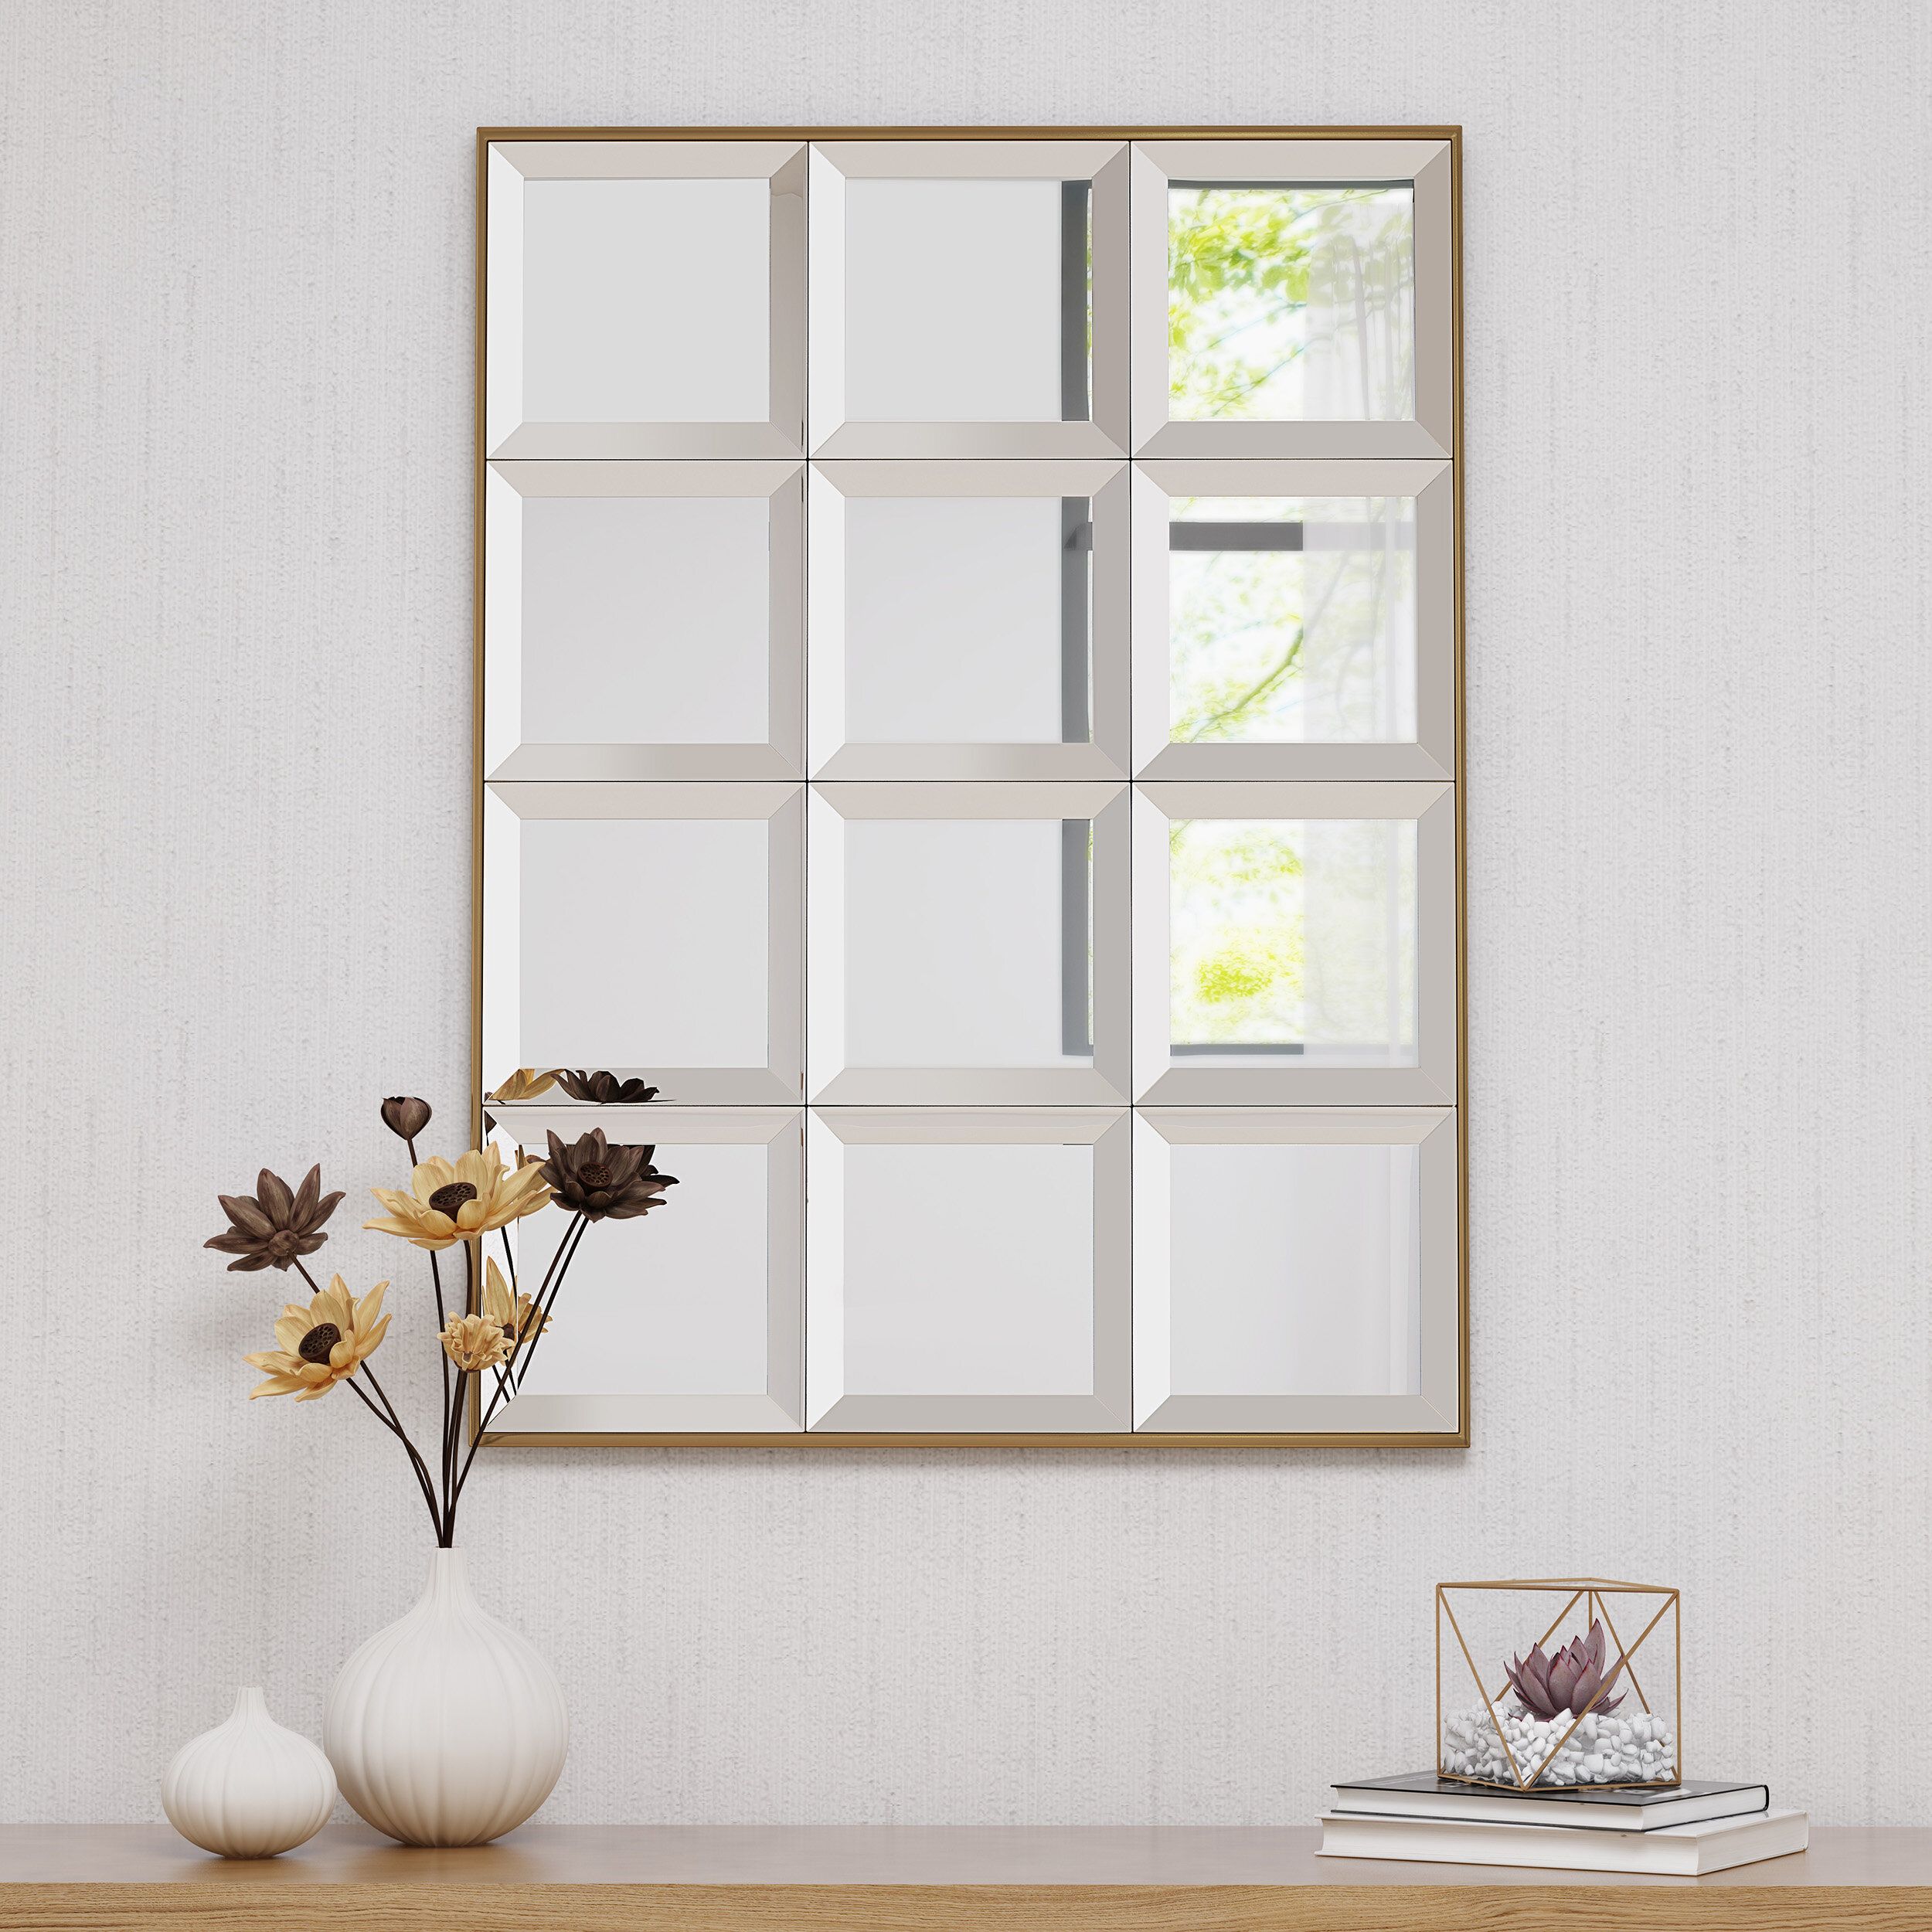 Boerner Rectangular Tile Like Modern Beveled Wall Mirror With Regard To 2 Piece Priscilla Square Traditional Beveled Distressed Accent Mirror Sets (View 14 of 20)